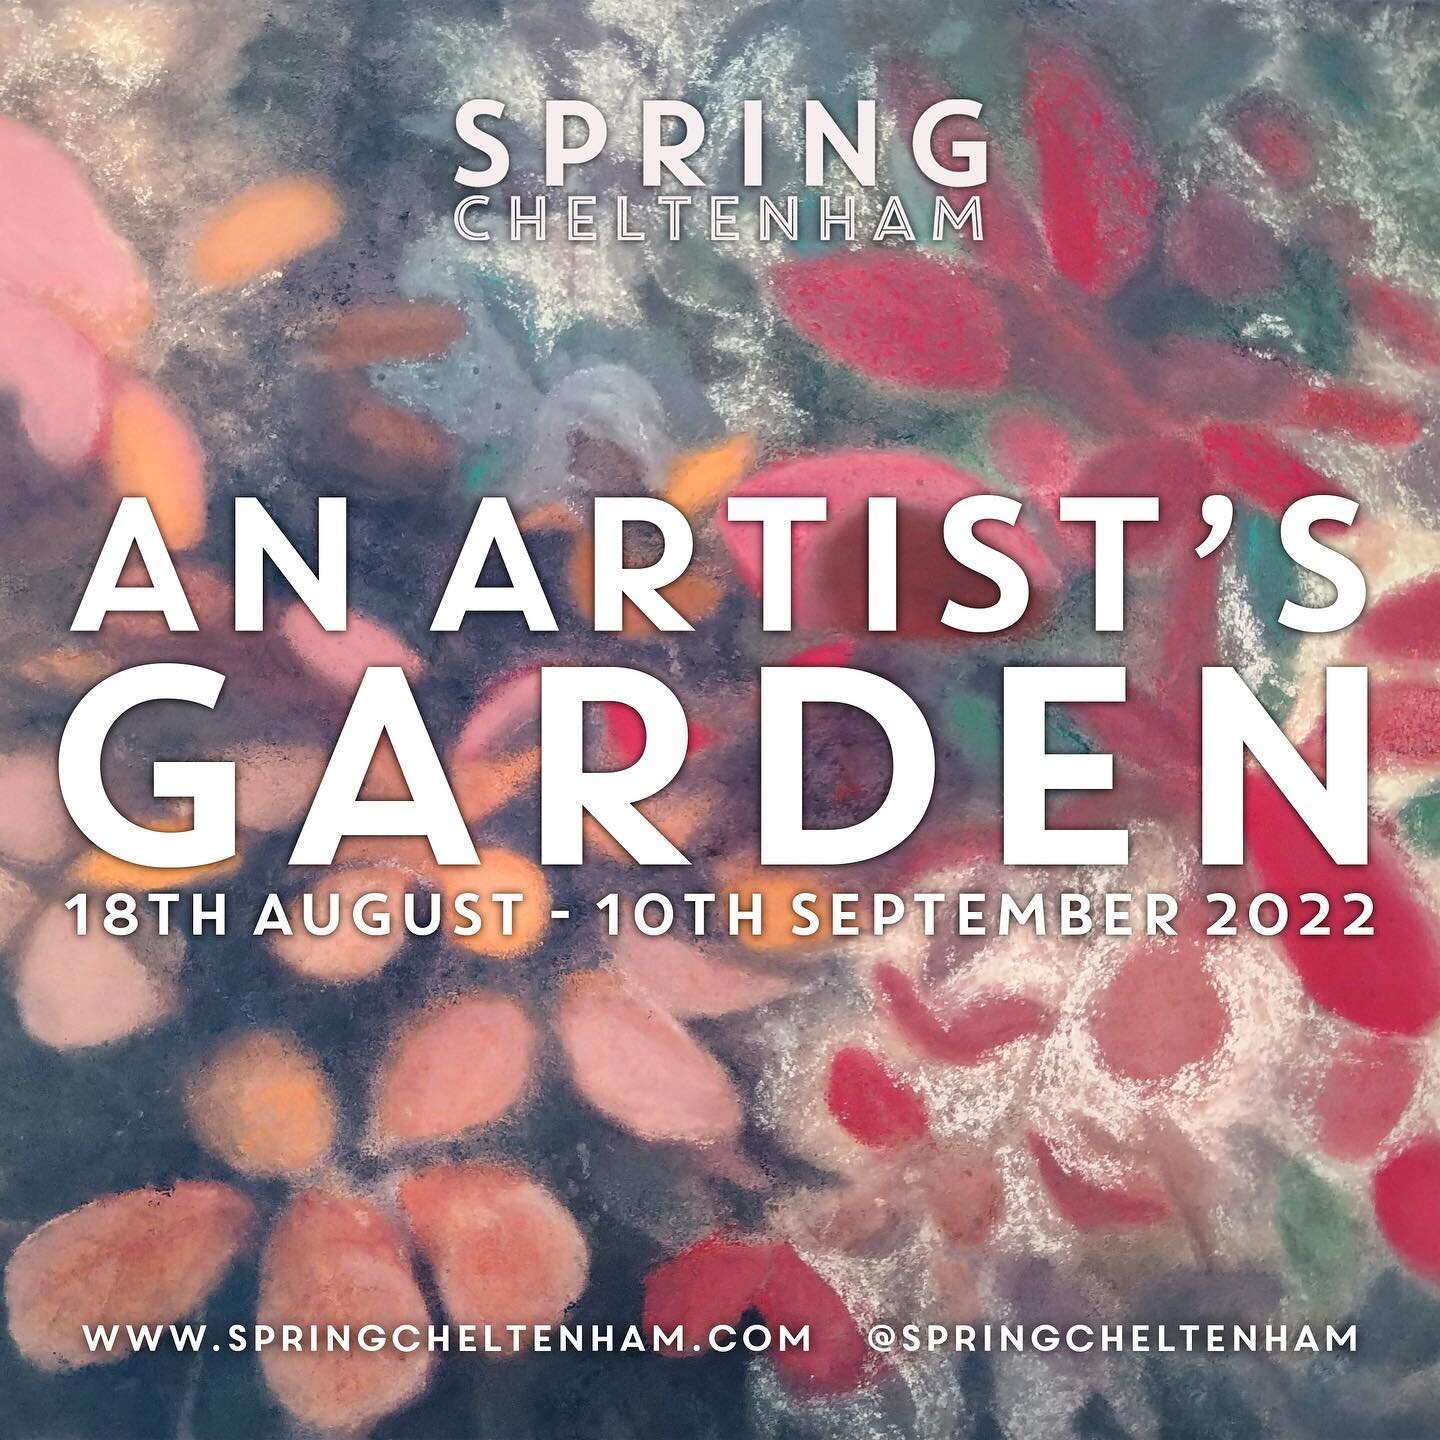 Opening tomorrow!!! 

A brand new SPRING curated show featuring a glorious array of paintings, photographs, ceramics and collages, all inspired by gardens. 

AN ARTIST'S GARDEN
18th August - 10th September 2022 Tuesday - Saturday, 10am - 5pm

Conrad 